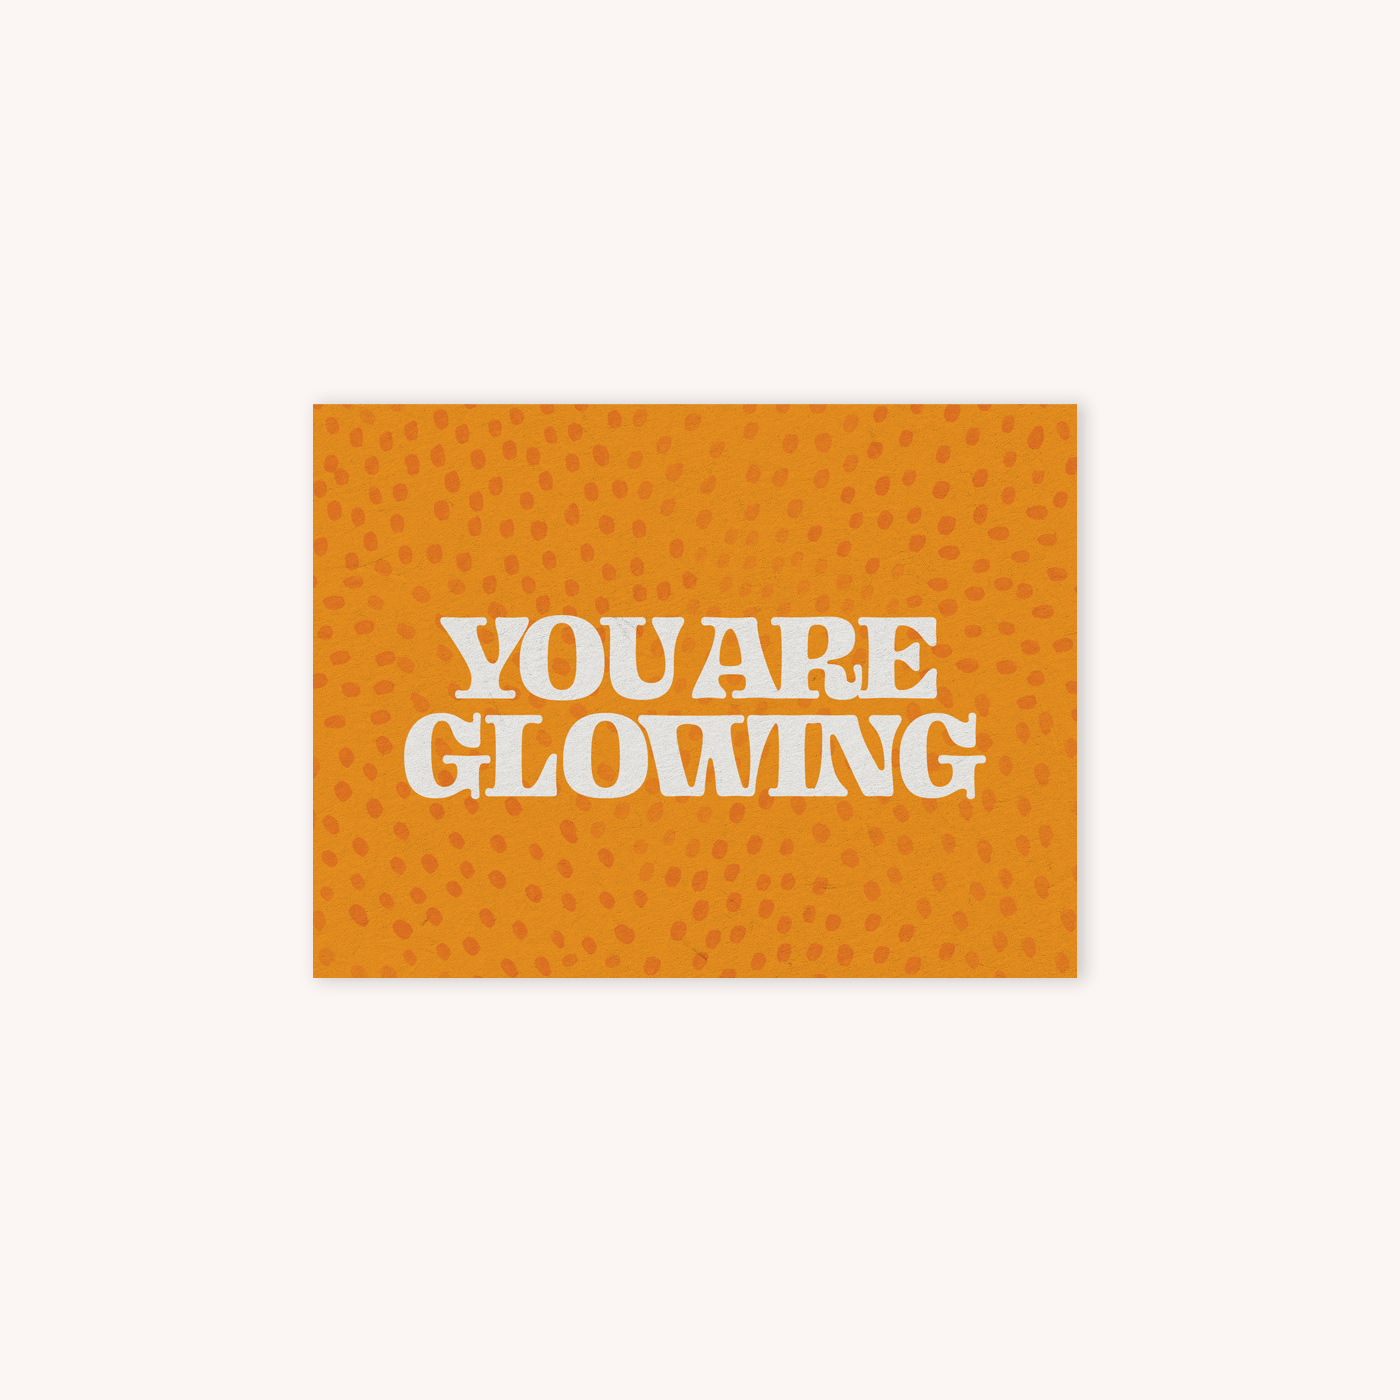 Card that says You are Glowing with a orange abstract dotted background